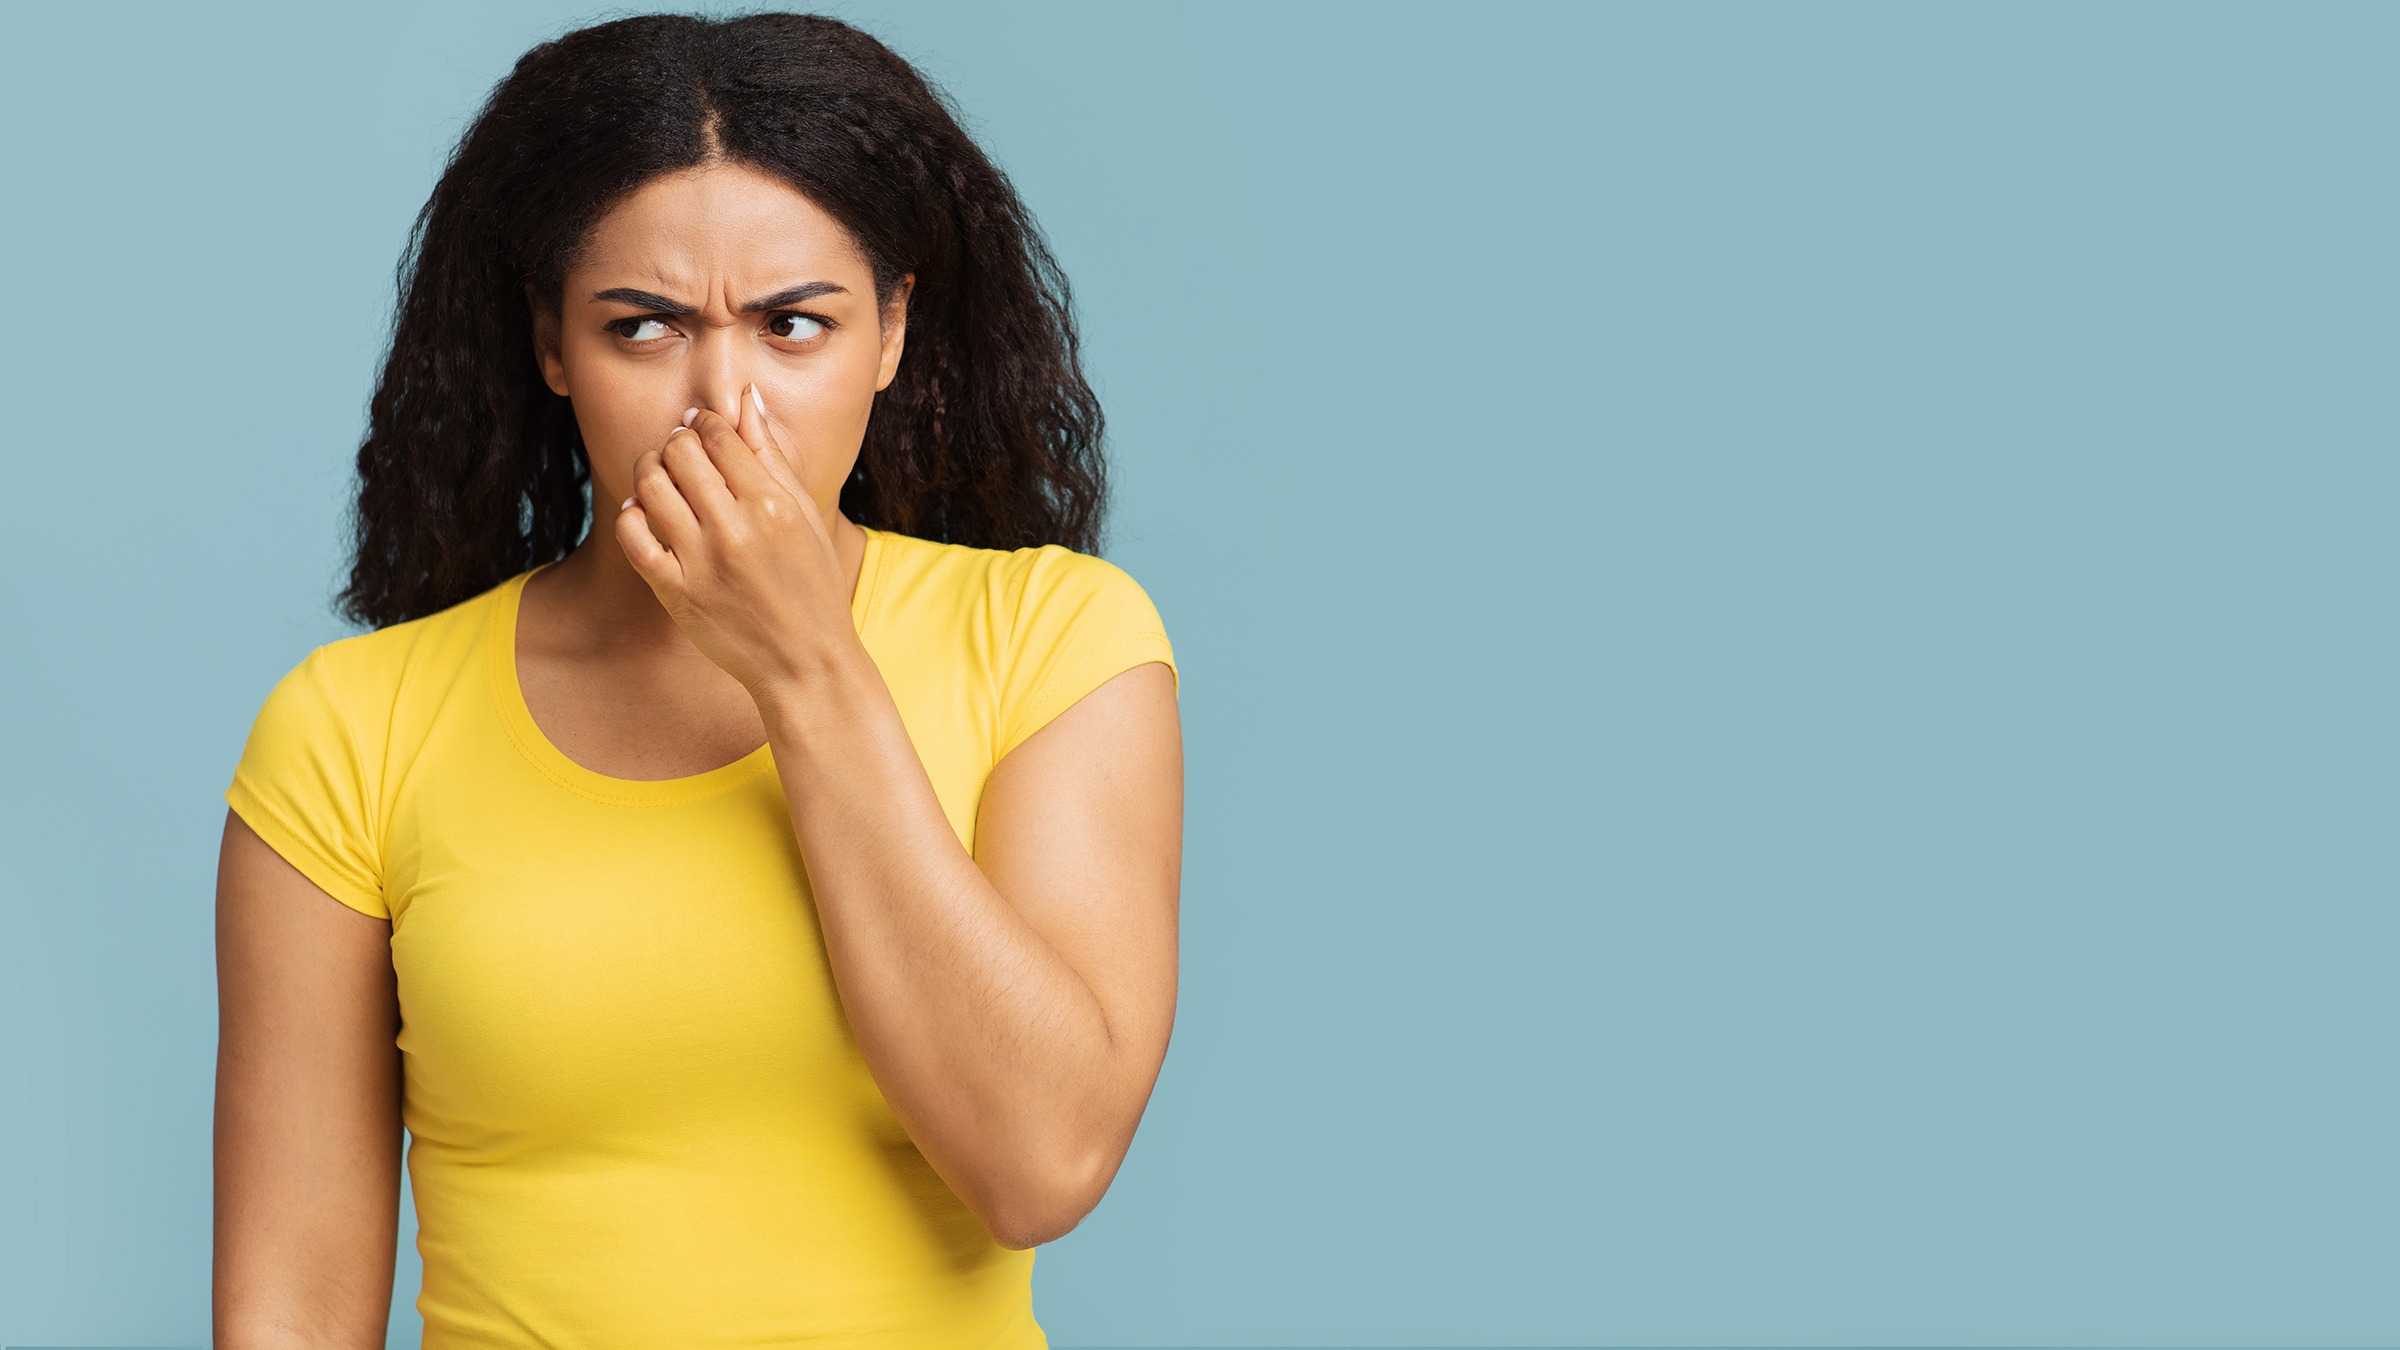 Farting: The questions you're too embarrassed to ask